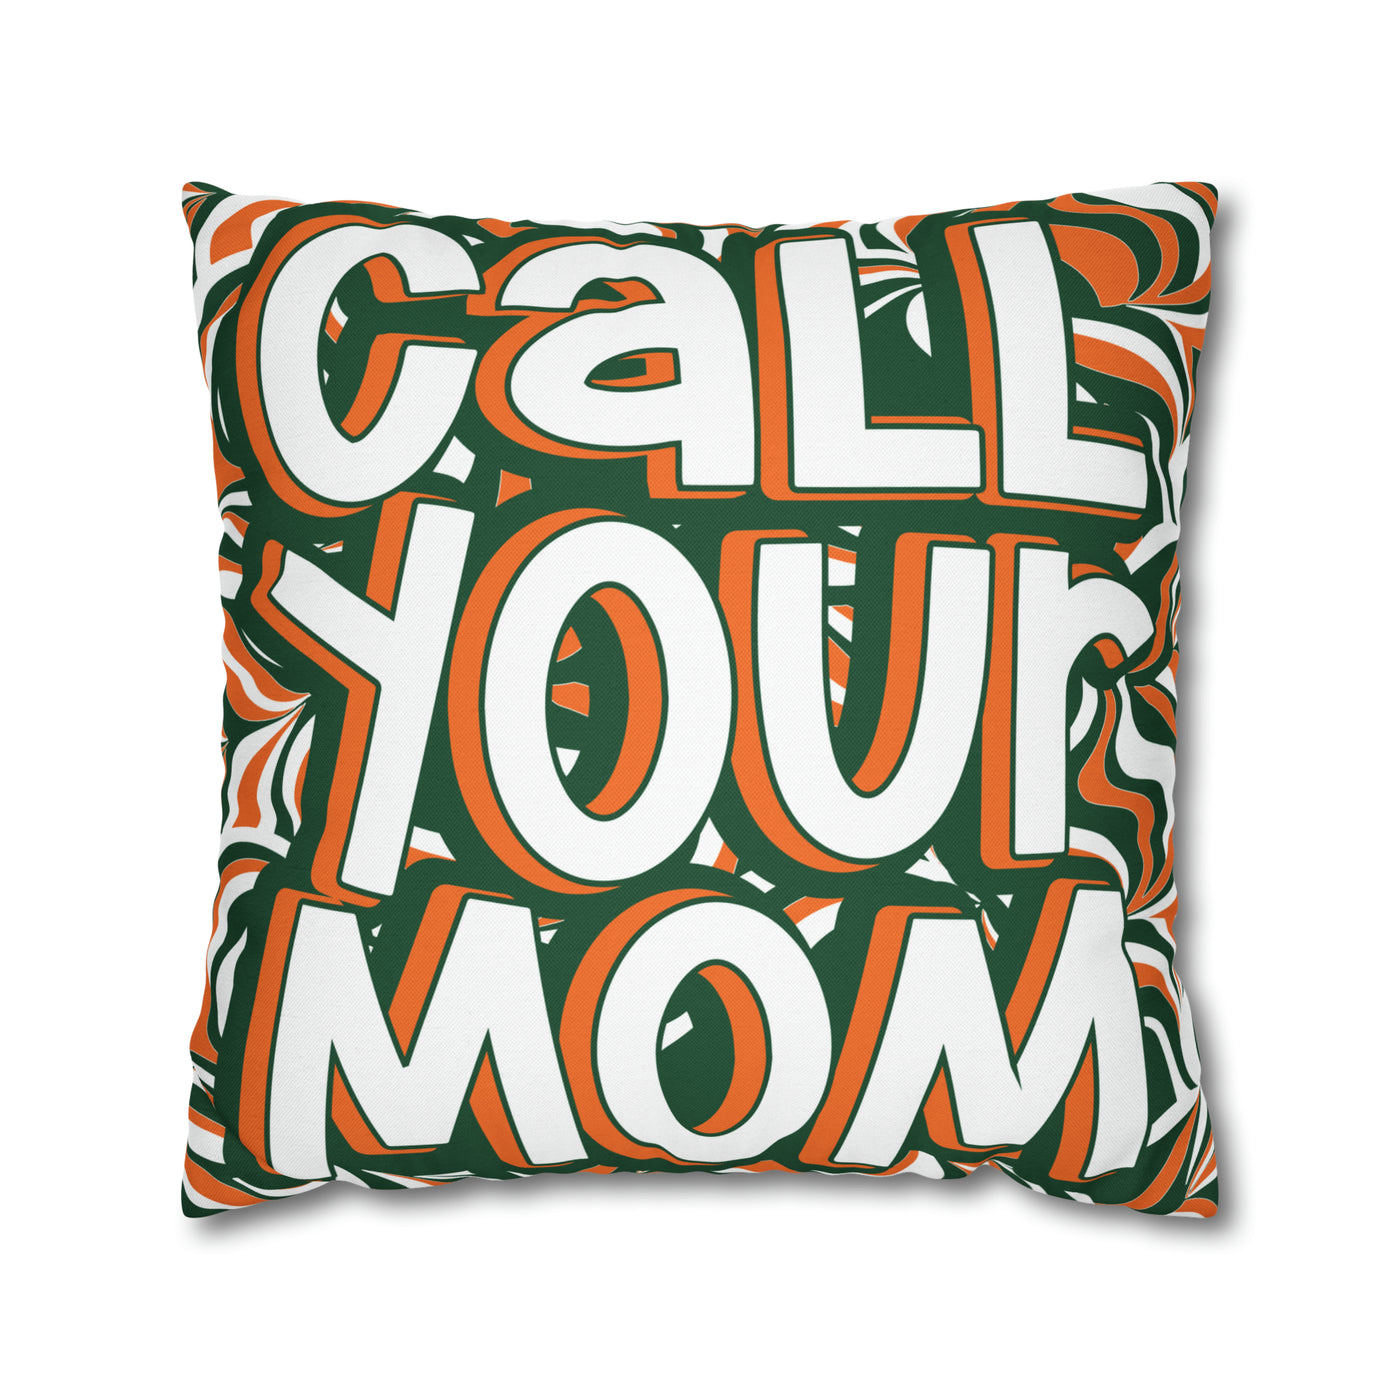 Call Your Mom Miami Pillow